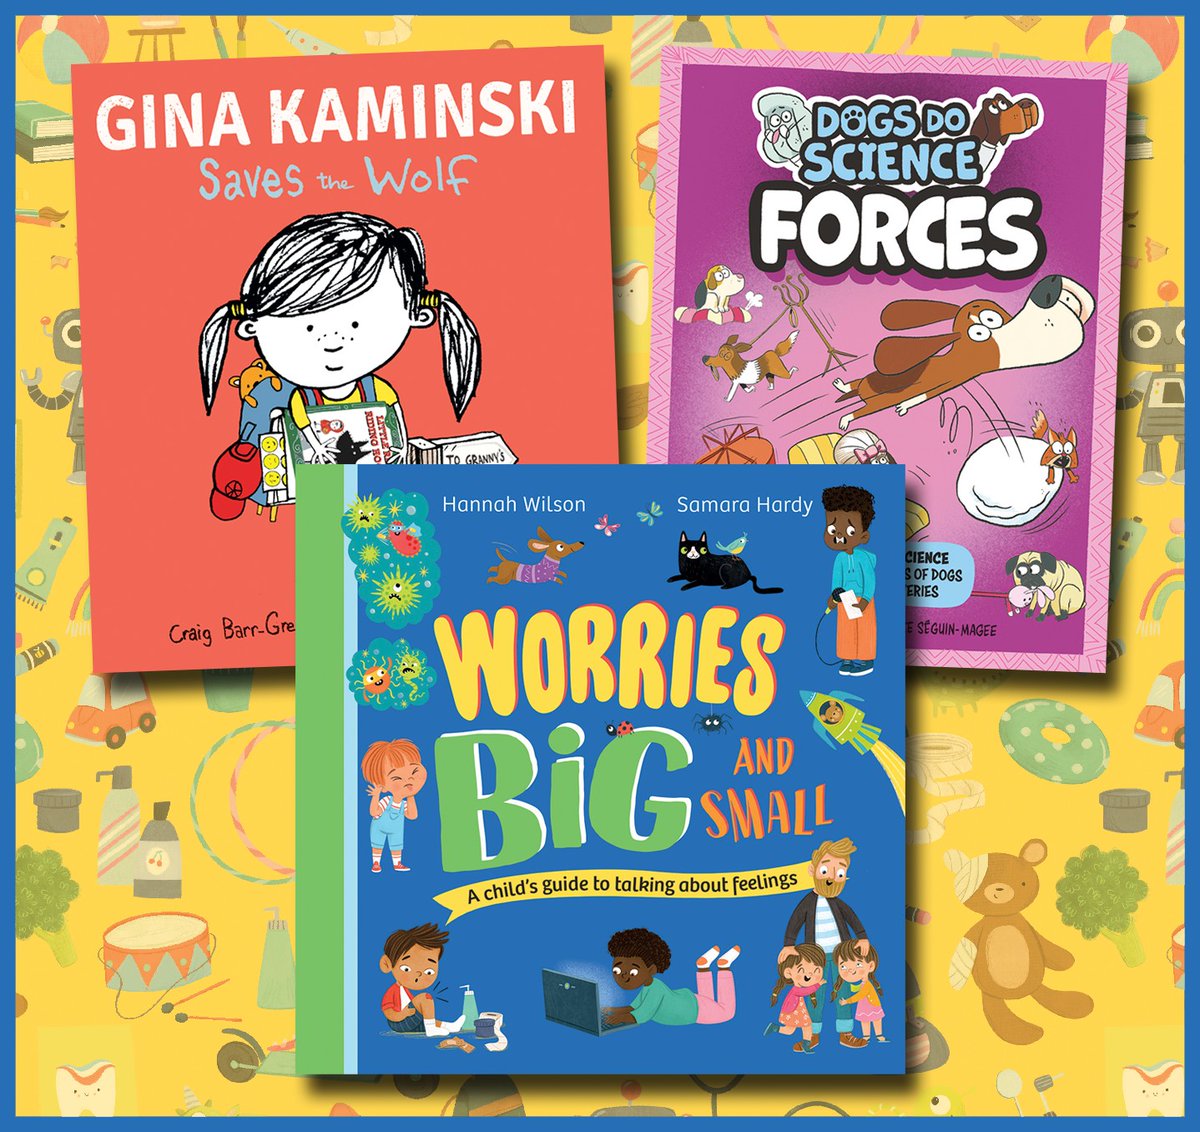 Three Kane Miller titles have been selected for @CBCBook's Februrary Hot Off the Press list: GINA KAMINSKI SAVES THE WOLF (Craig Barr-Green, @korkymaster), FORCES (@TheClayborg, Luke Séguin-Magee), and WORRIES BIG AND SMALL (Hannah Wilson, @SamaraHardy)! cbcbooks.org/cbc-book-lists…